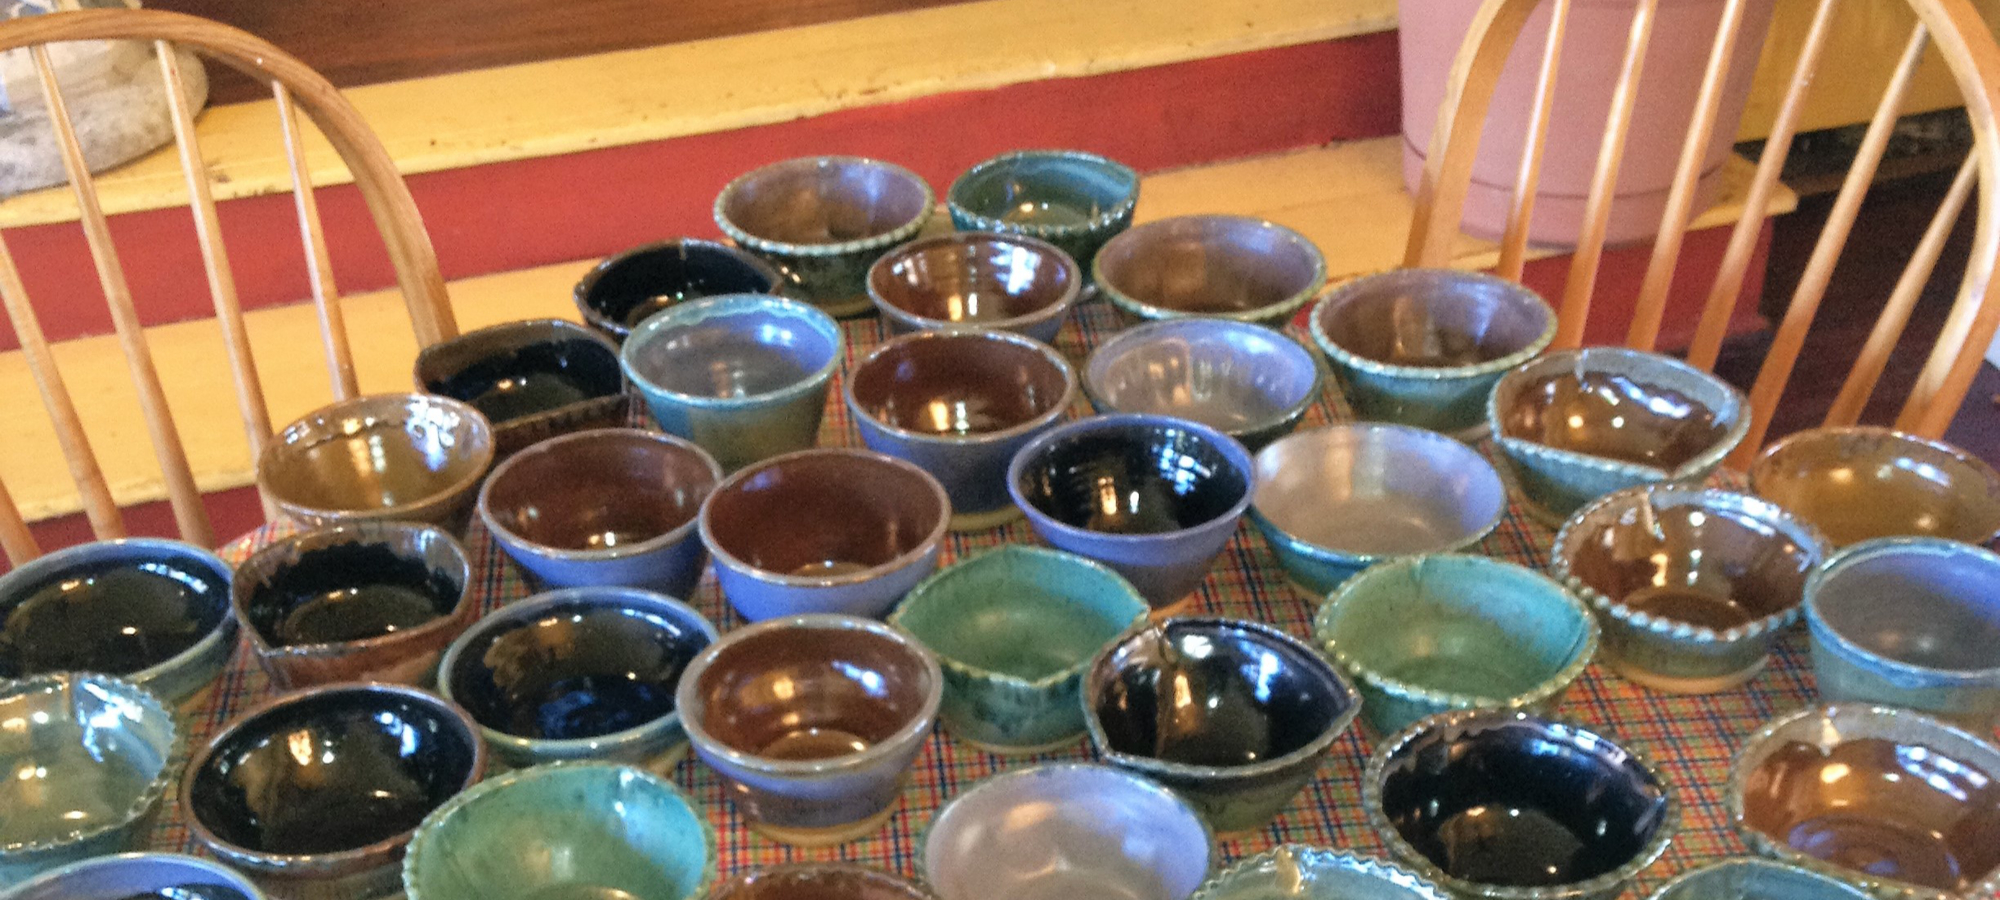 Bowls that take up entire table made at Artcroft